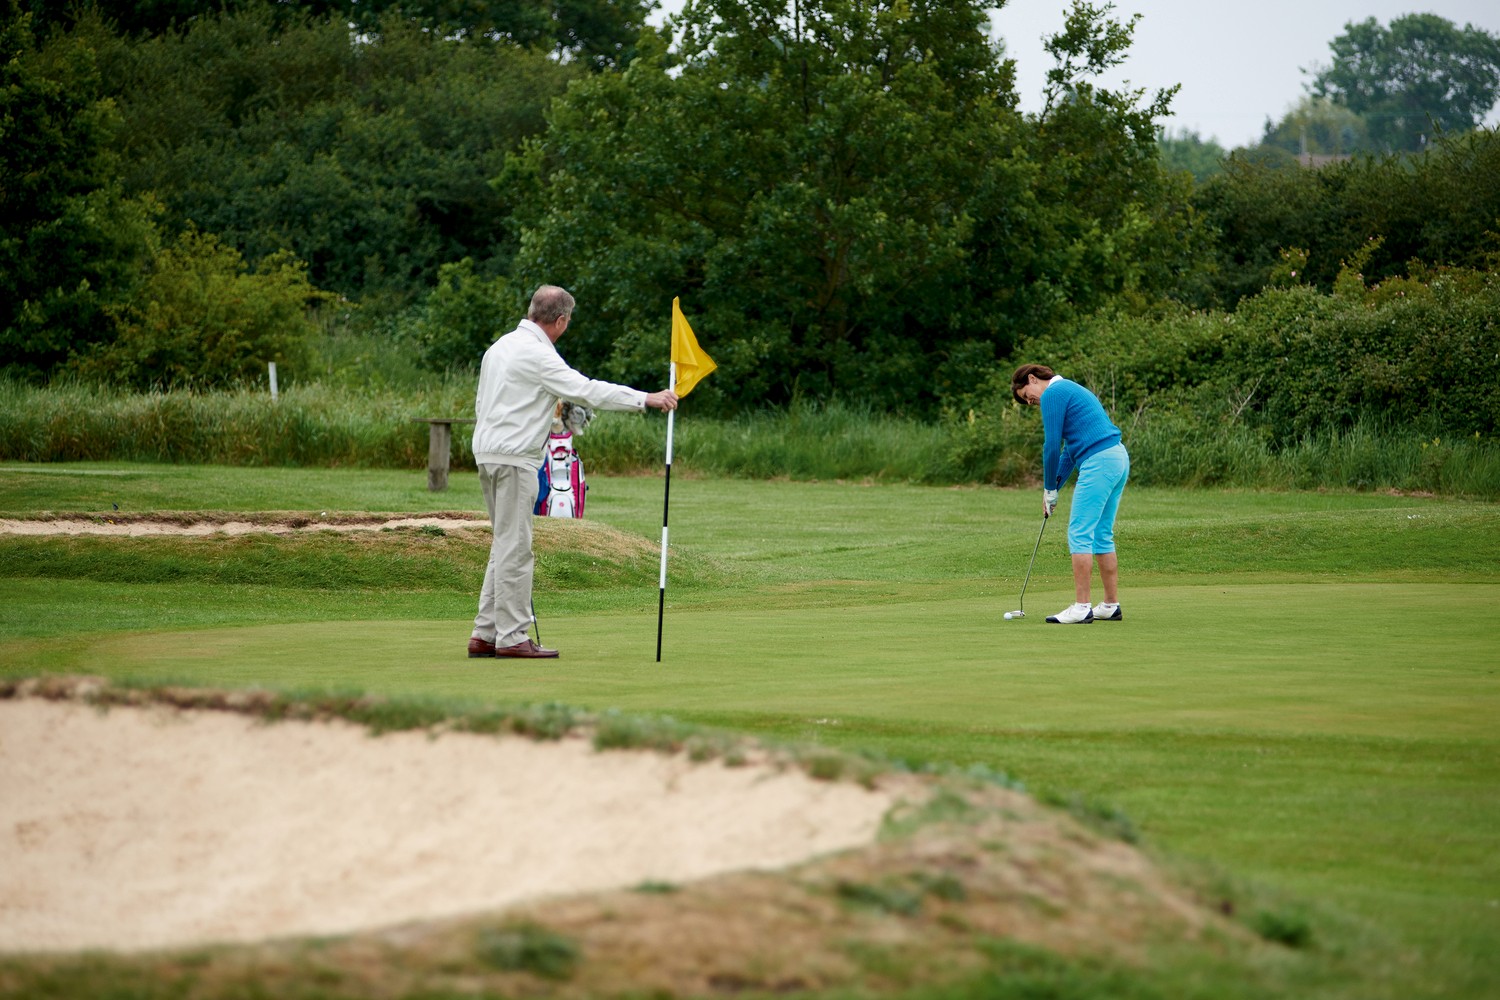 Golf holidays at The Orchards, Essex